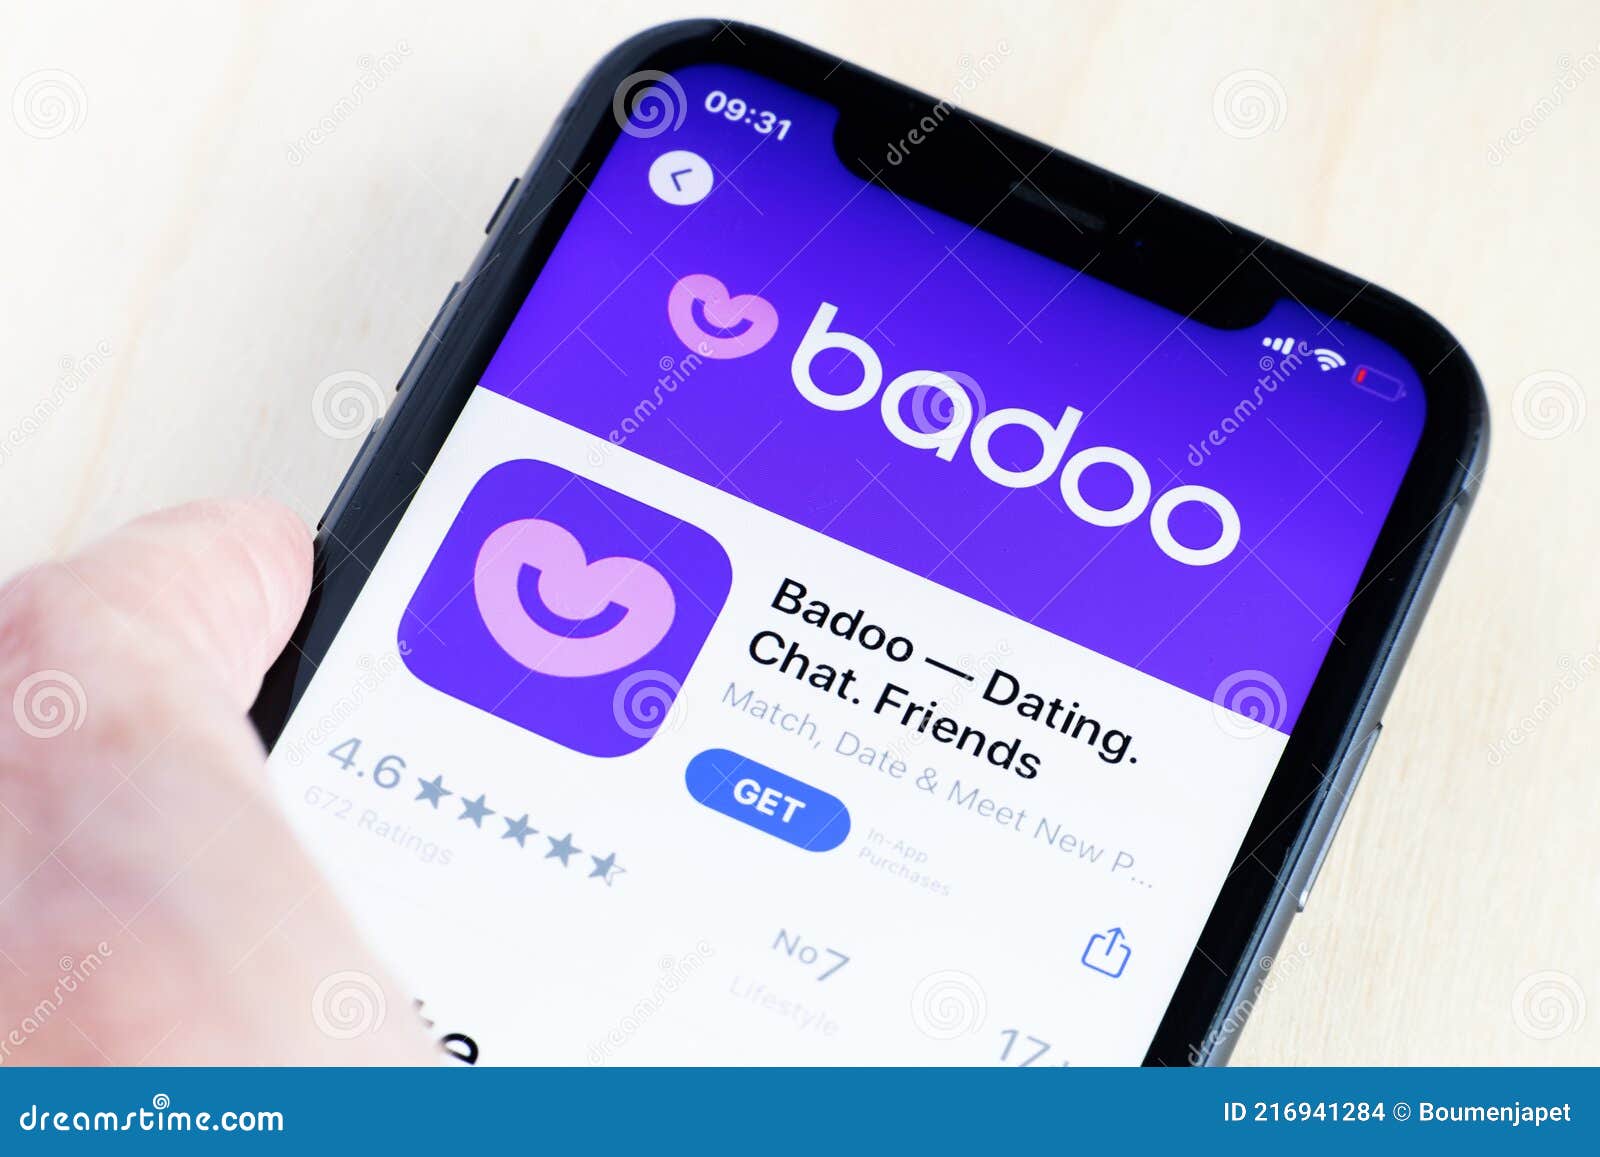 To badoo free trial how cancel How To